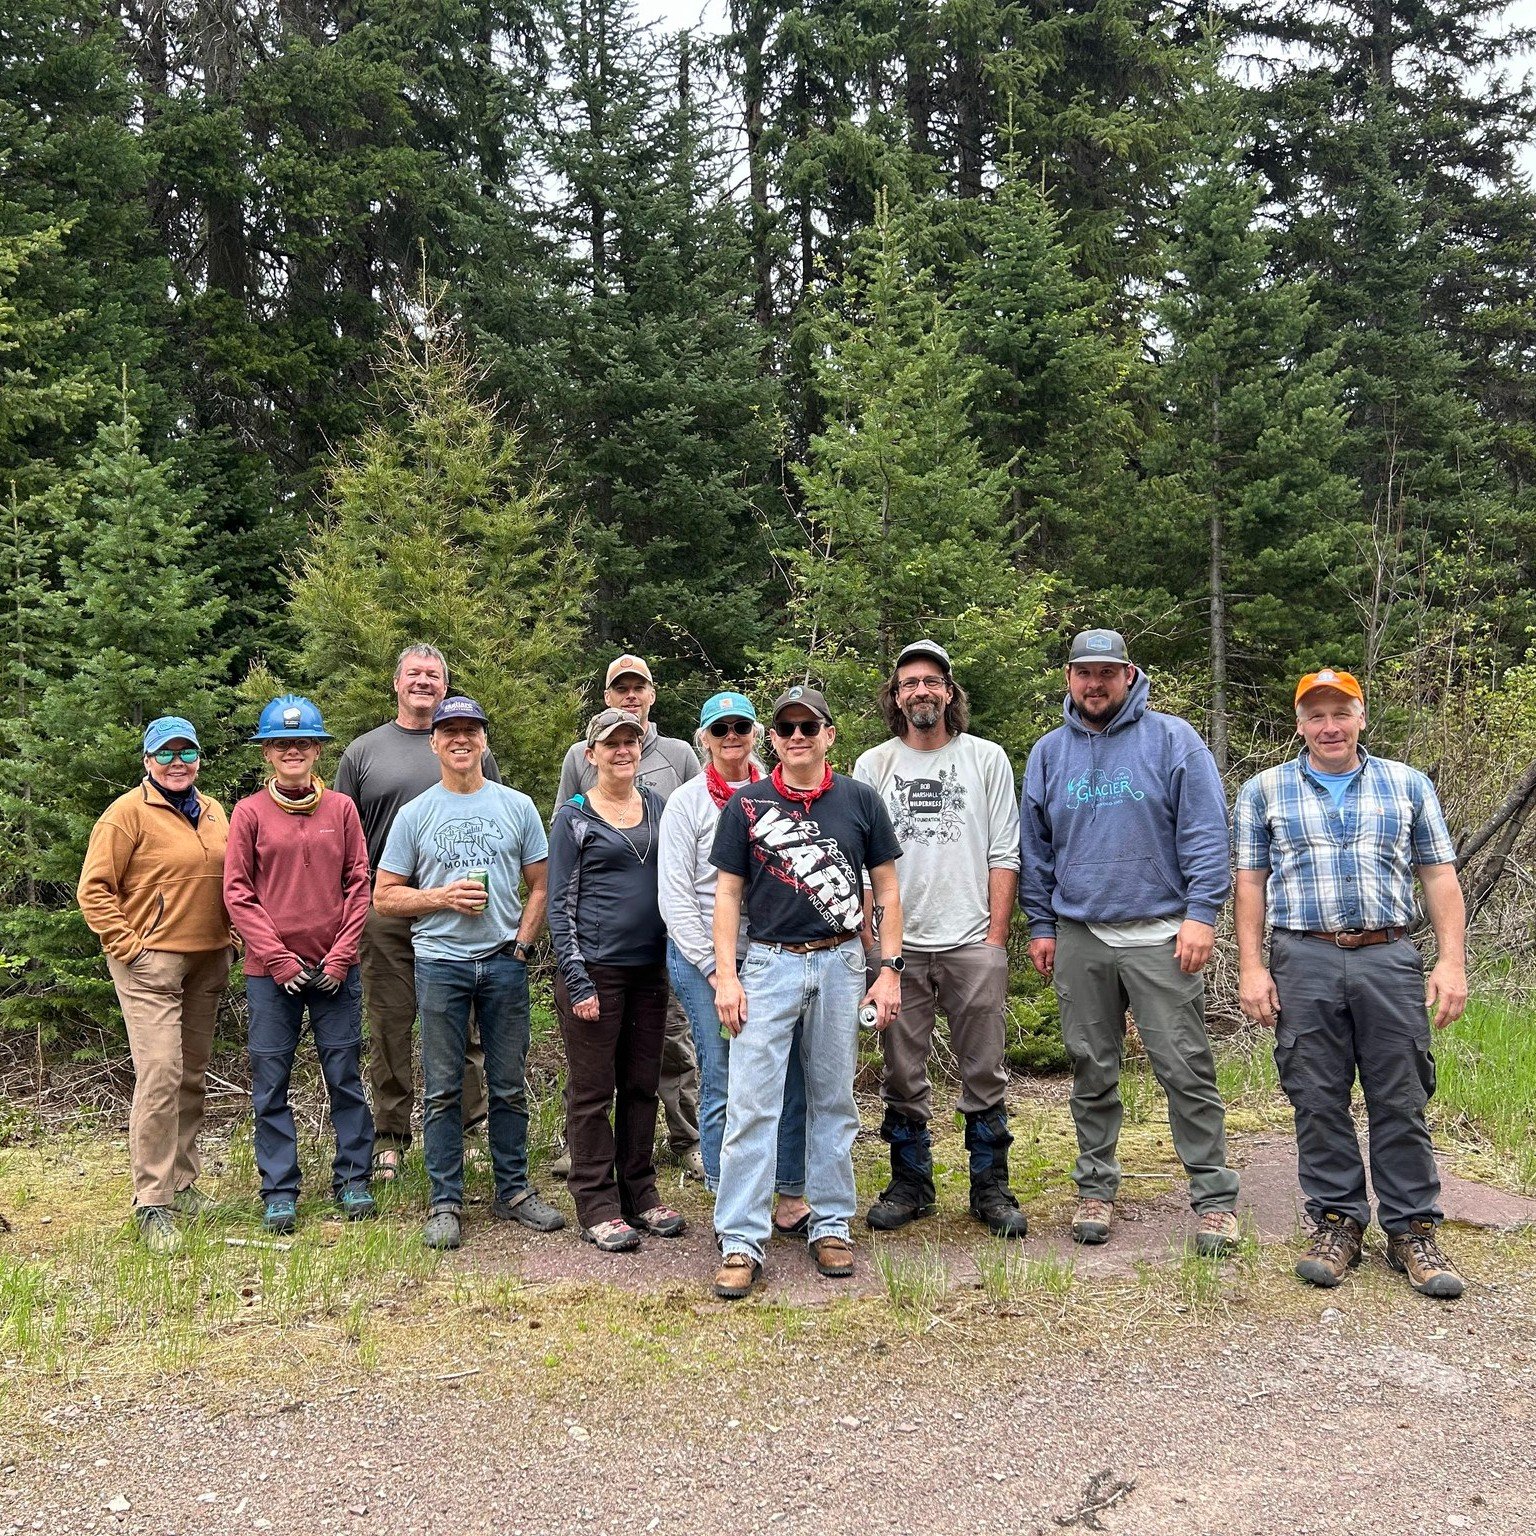 Our first volunteers for the summer joined us in the woods this weekend to celebrate #NationalTrailsDay! This awesome crew cleared Tunnel Creek Trail #117 in the Great Bear Wilderness, for our fourth year partnering with @wildmontana to reestablish t